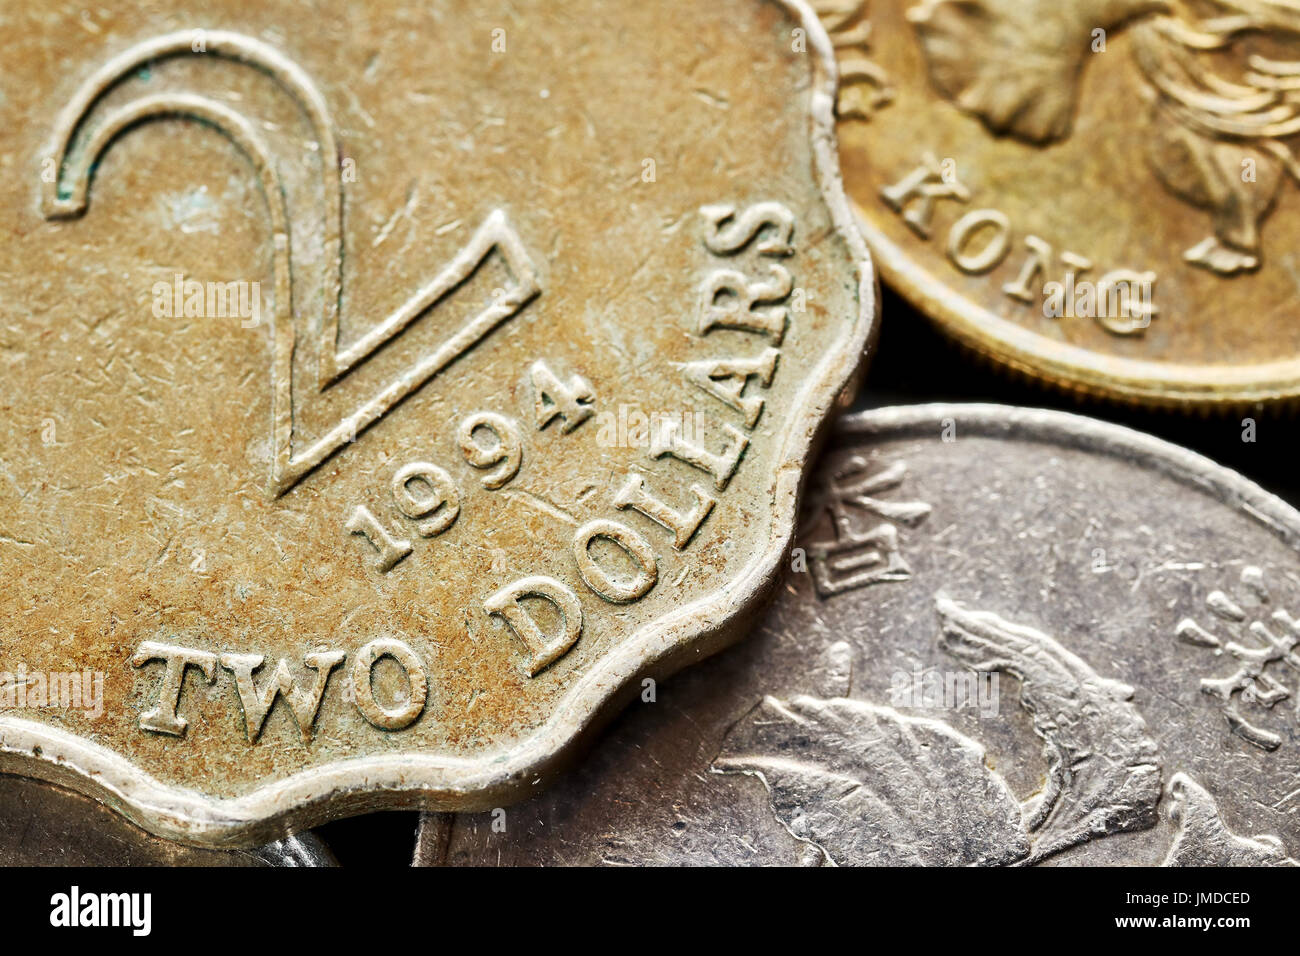 Close up picture of Hong Kong dollar, shallow depth of field. Stock Photo